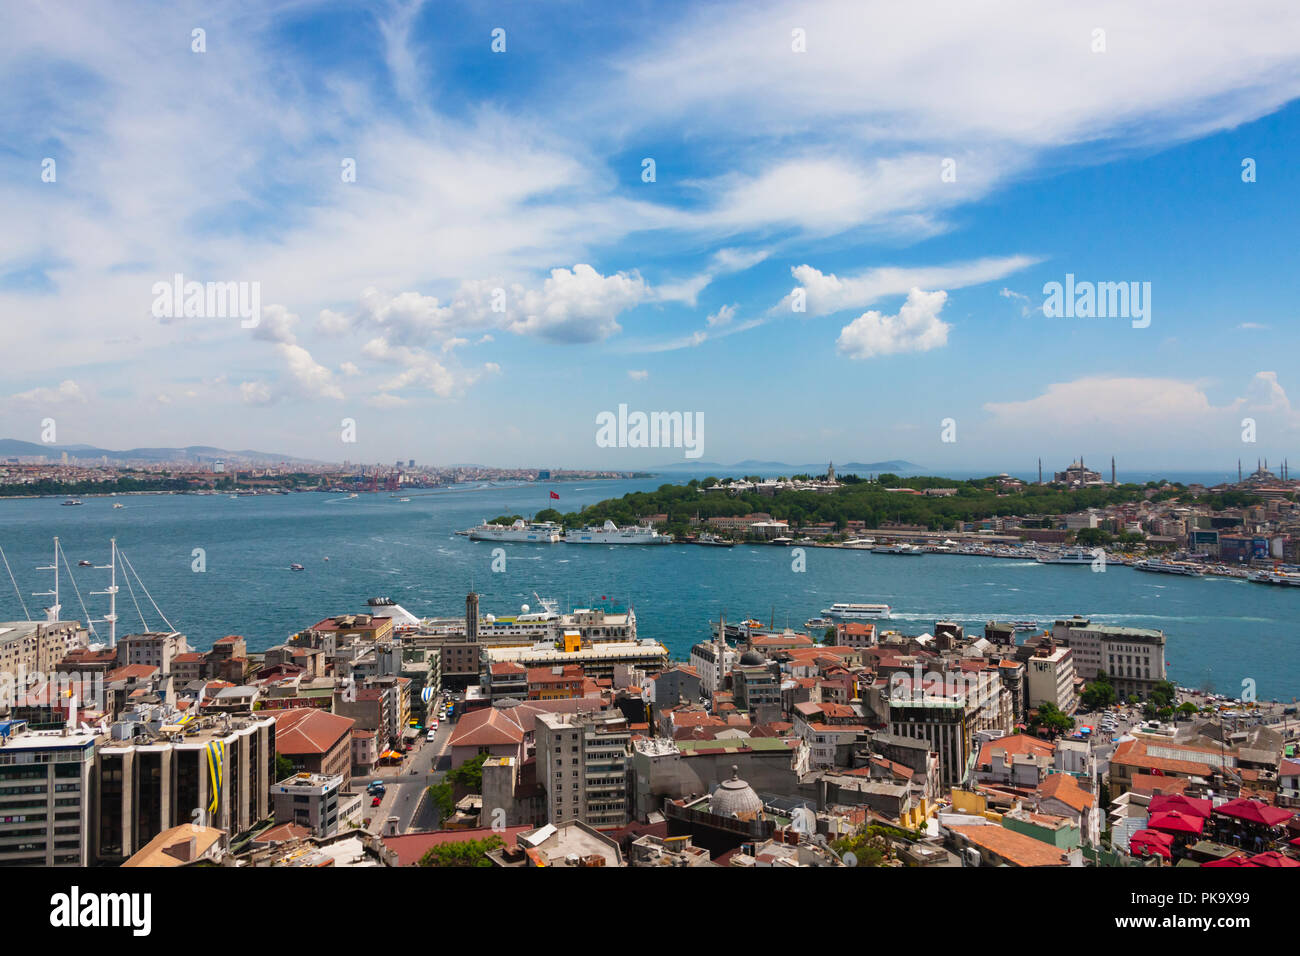 View of buildings and harbor on the Bosphorus, Golden Horn, Istanbul, Turkey Stock Photo